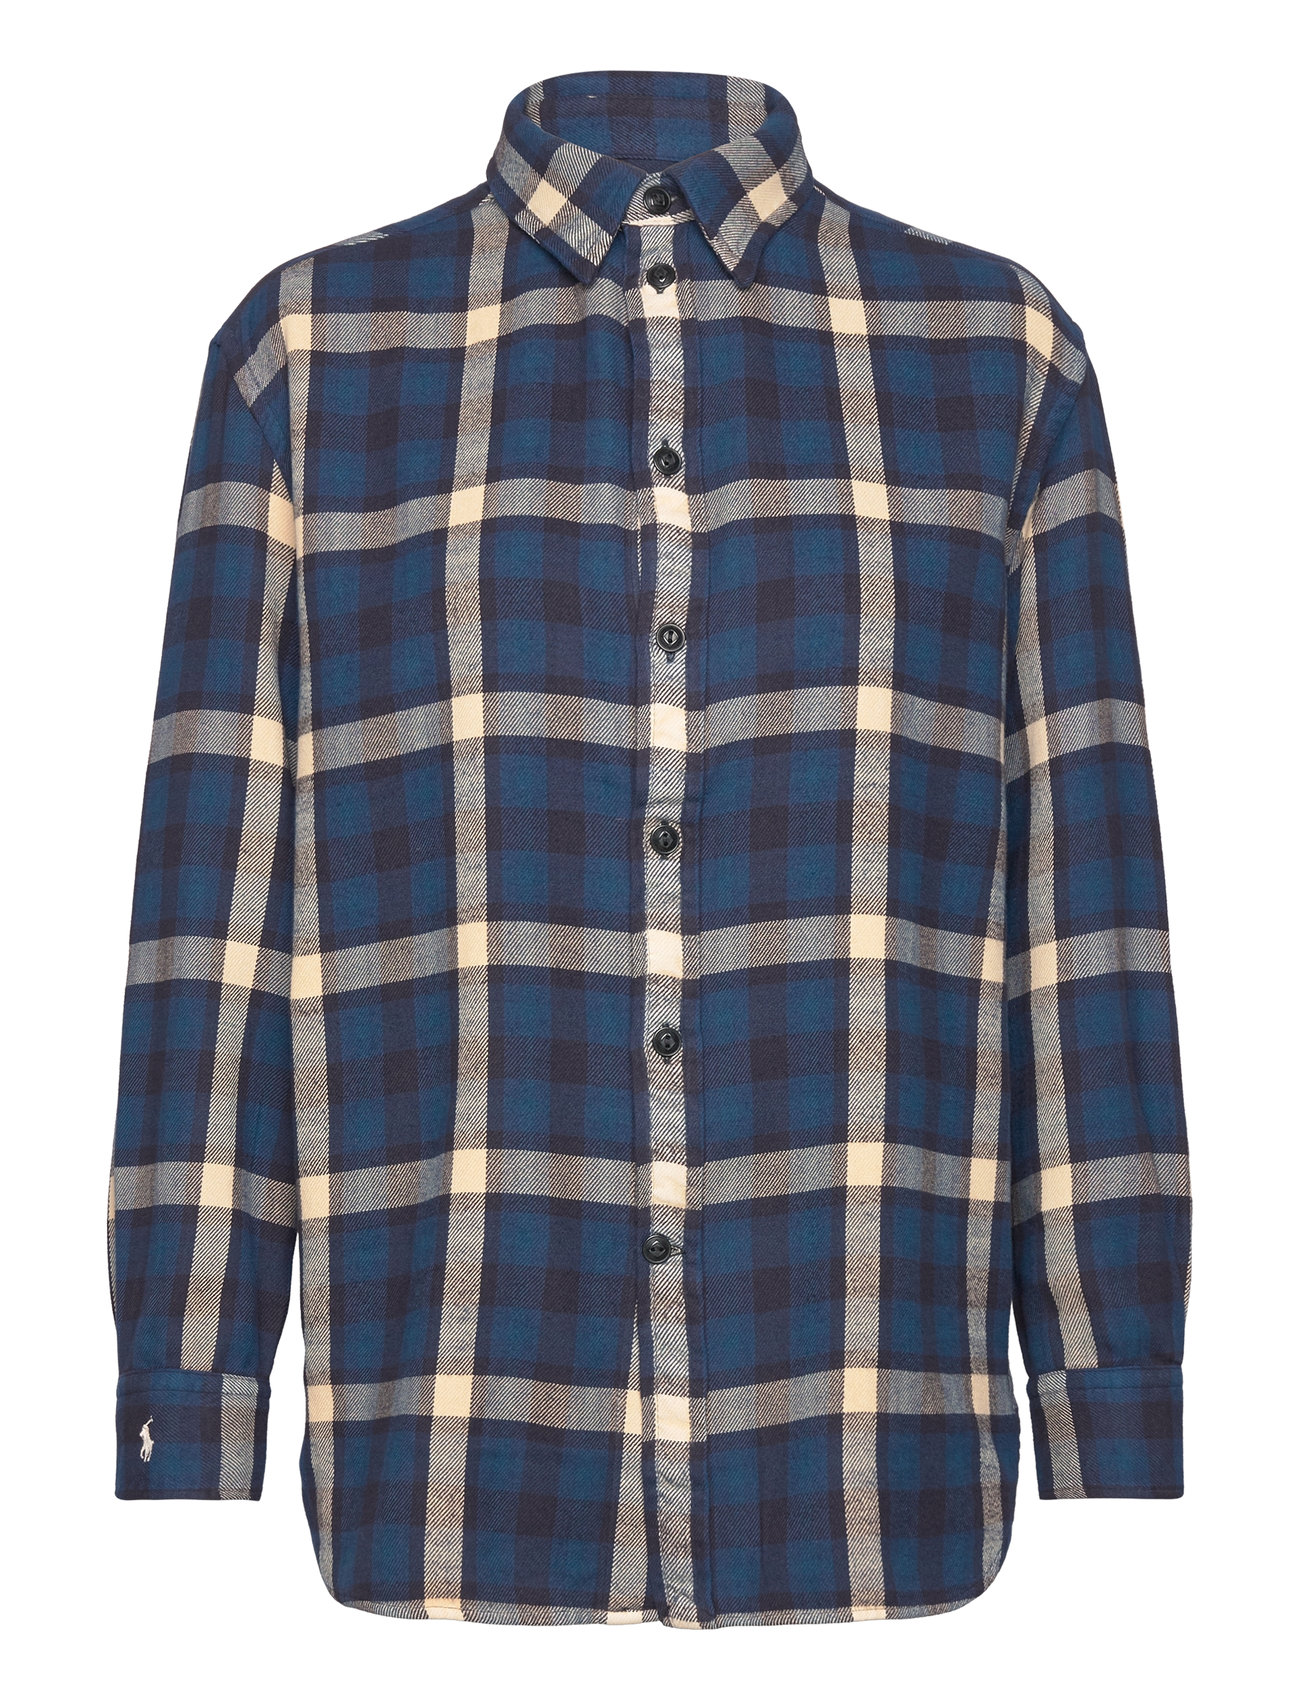 Over Fit Plaid Cotton Twill Shirt Tops Shirts Long-sleeved Blue Polo Ralph Lauren